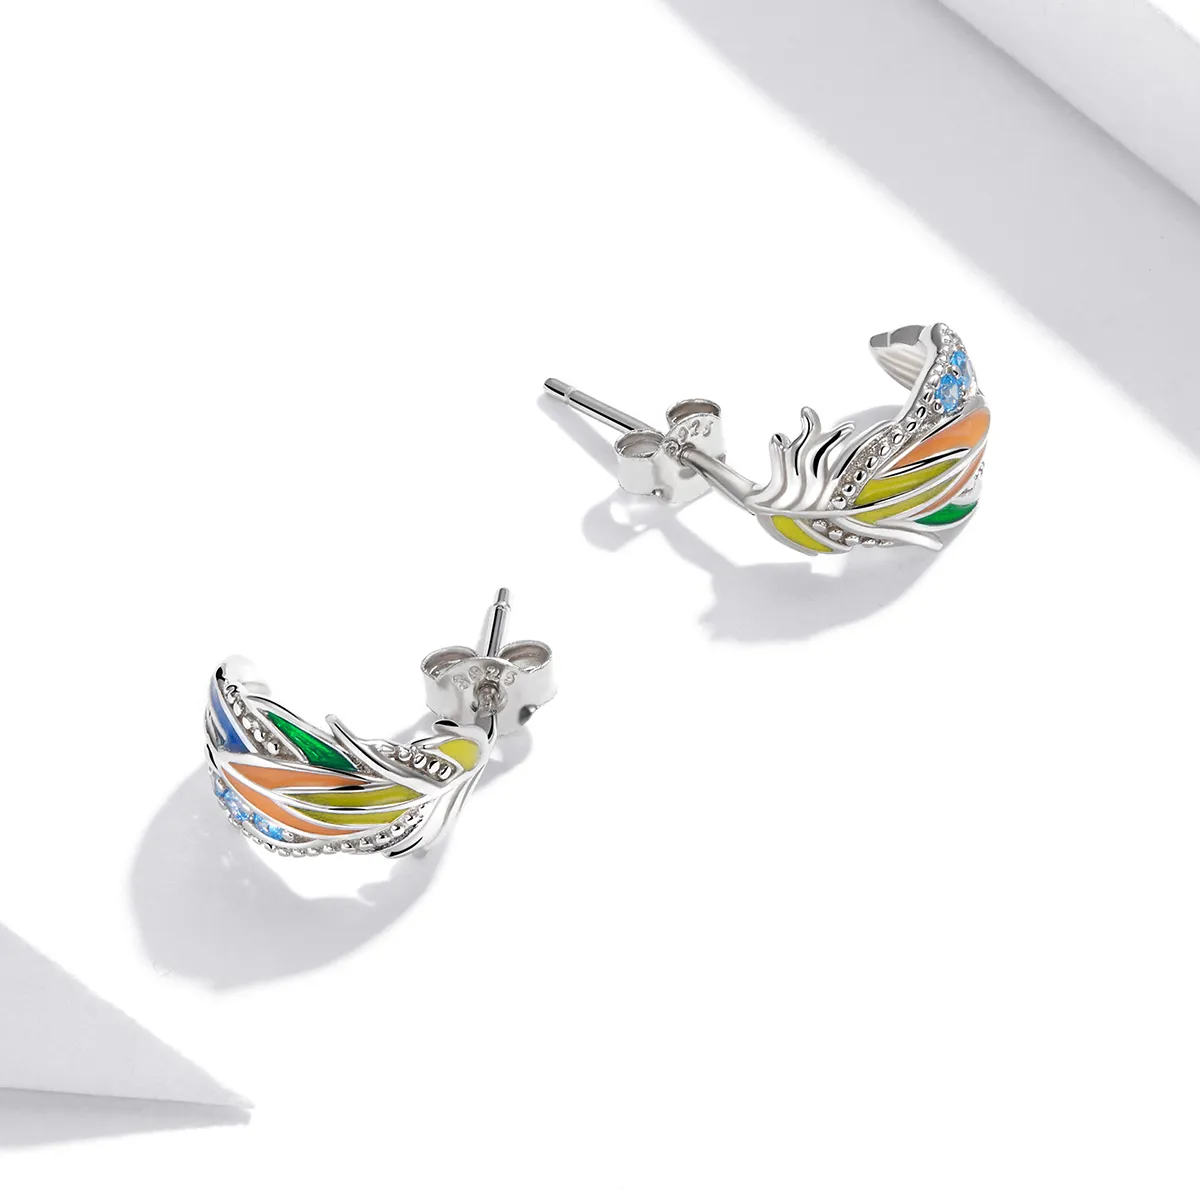 Pandora Style Silver colored feathers Stud Earrings - SCE1128